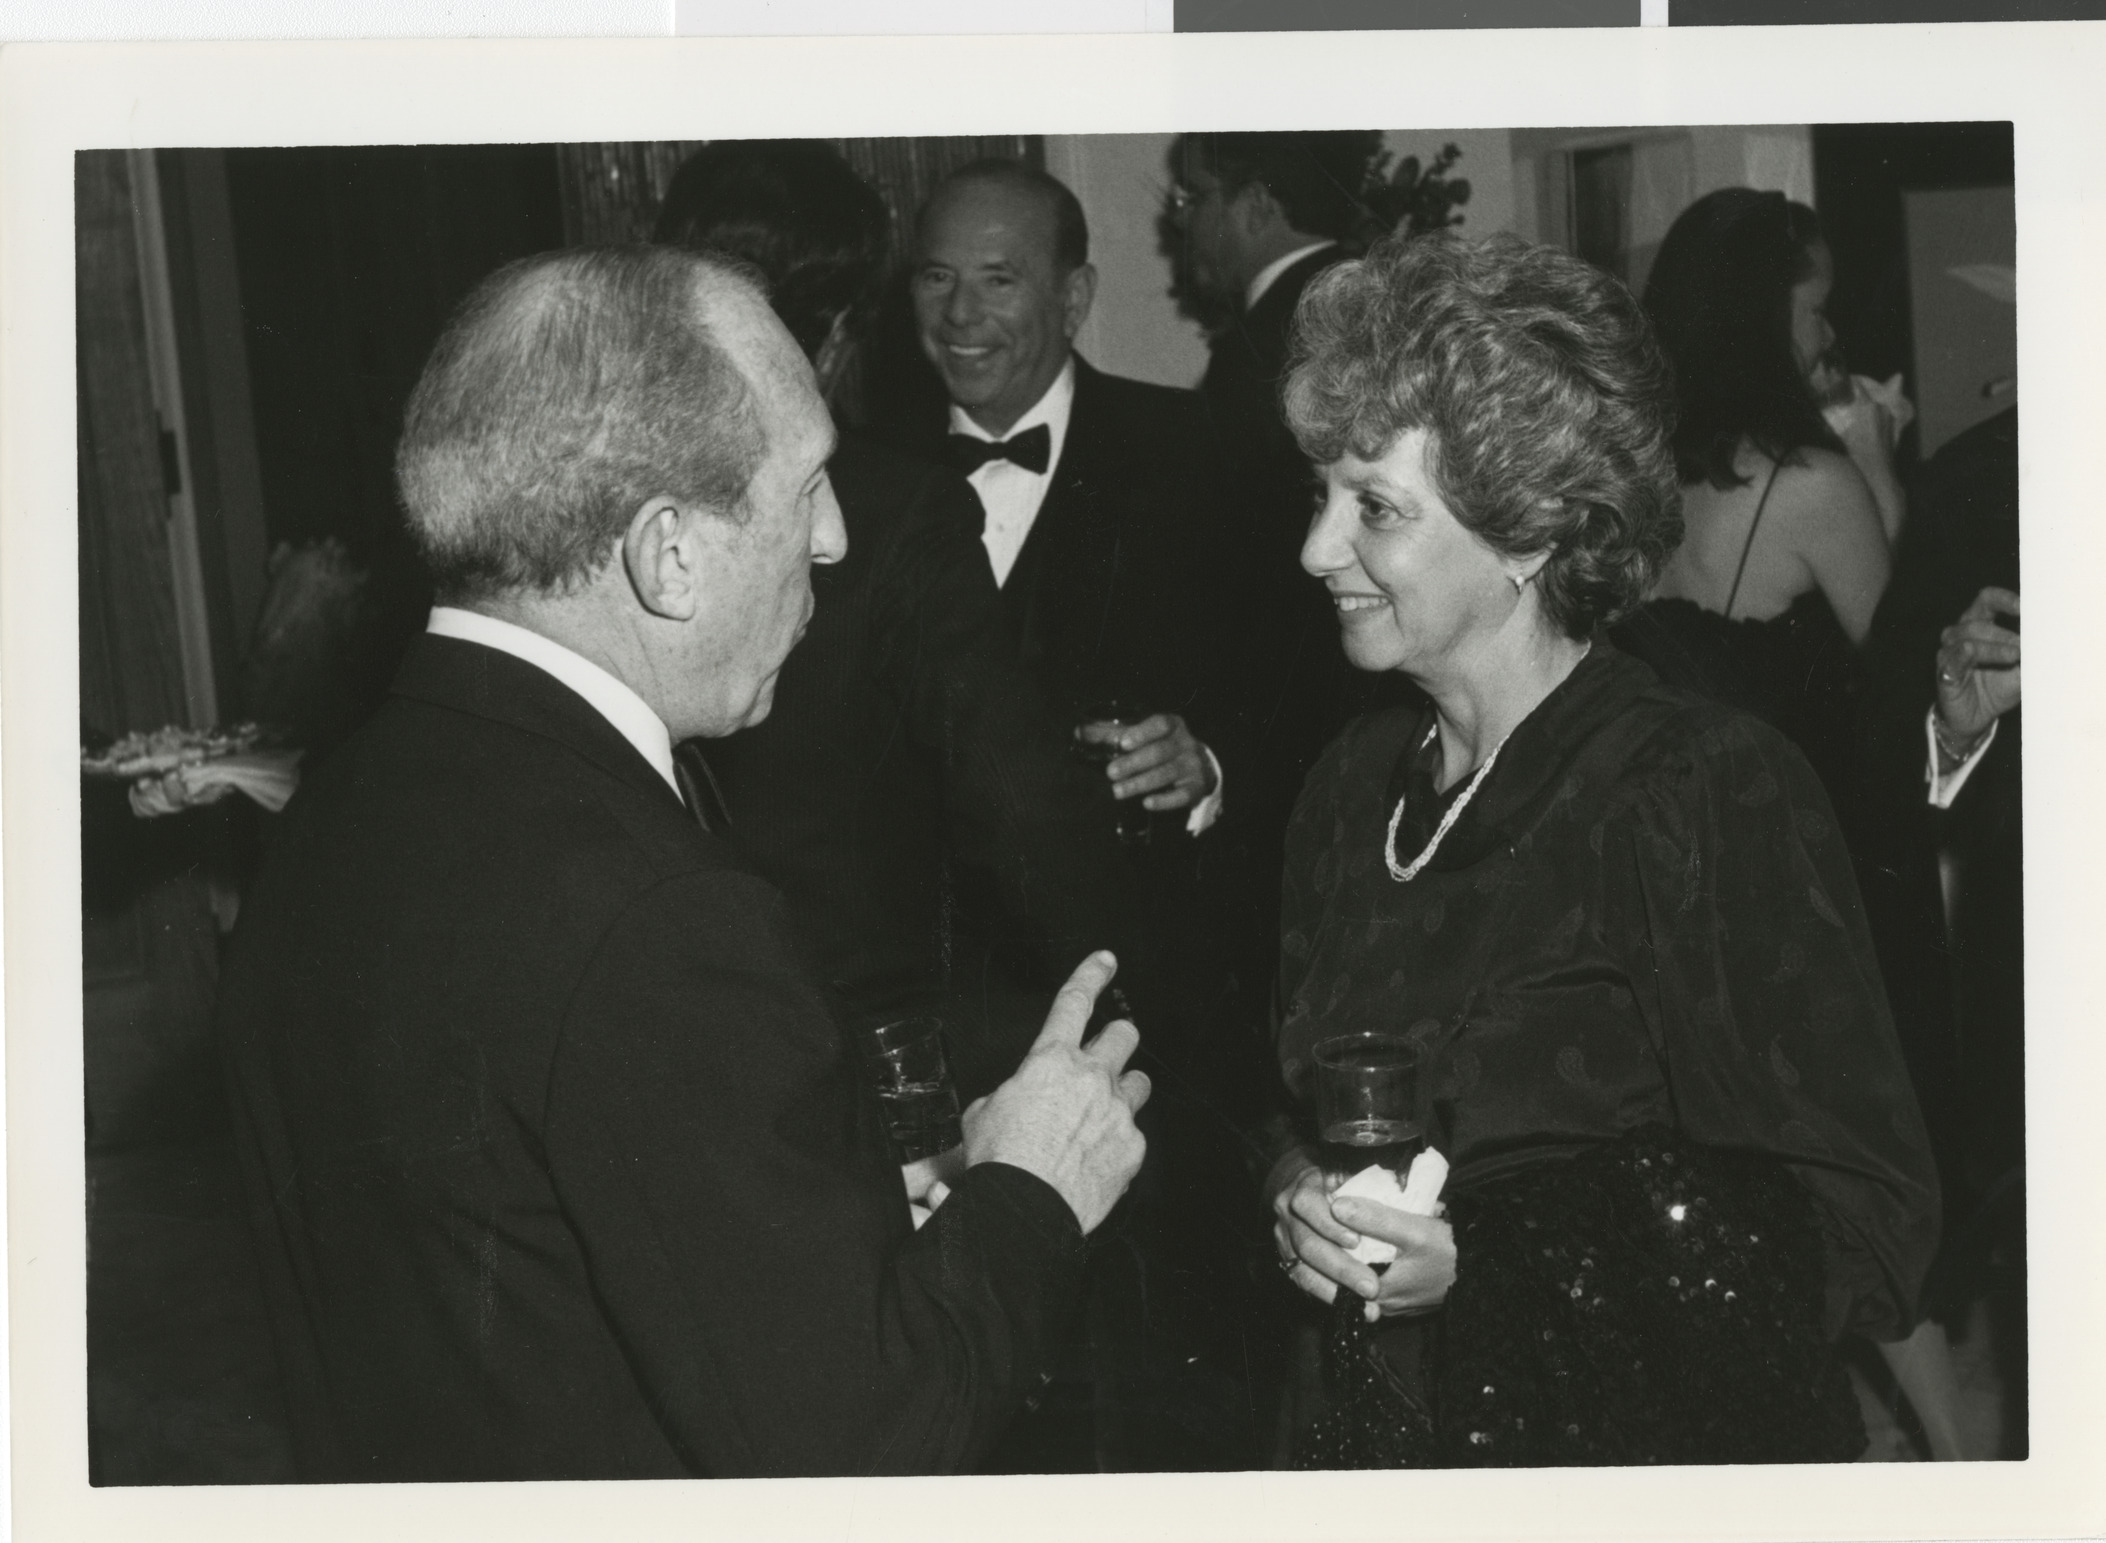 Photograph from Dorothy Eisenberg papers, January 1983